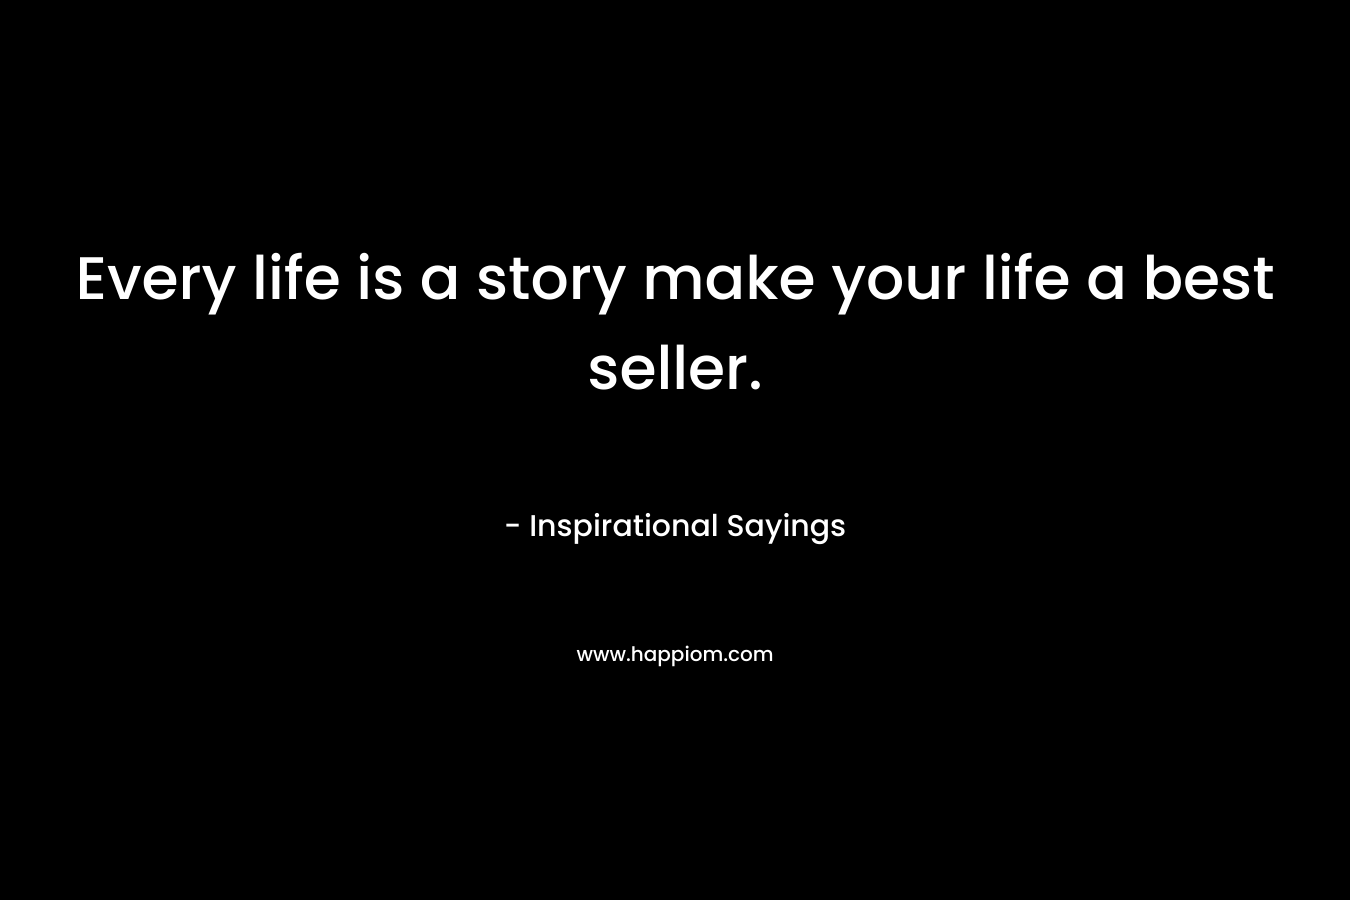 Every life is a story make your life a best seller.